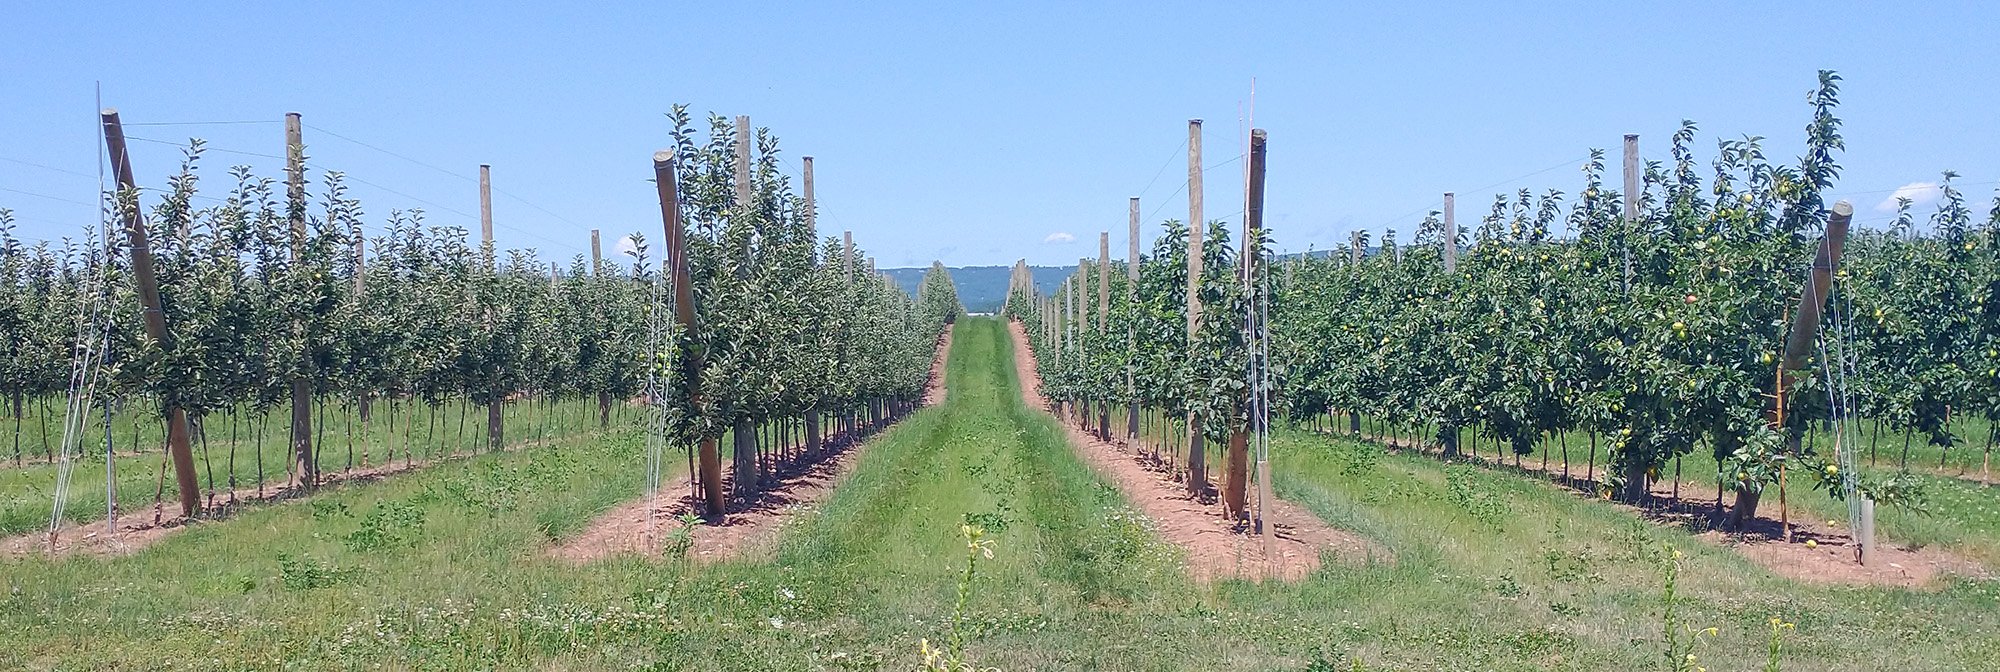 Apparently Nova Scotia has some wineries/orchards as well. Who would have known?